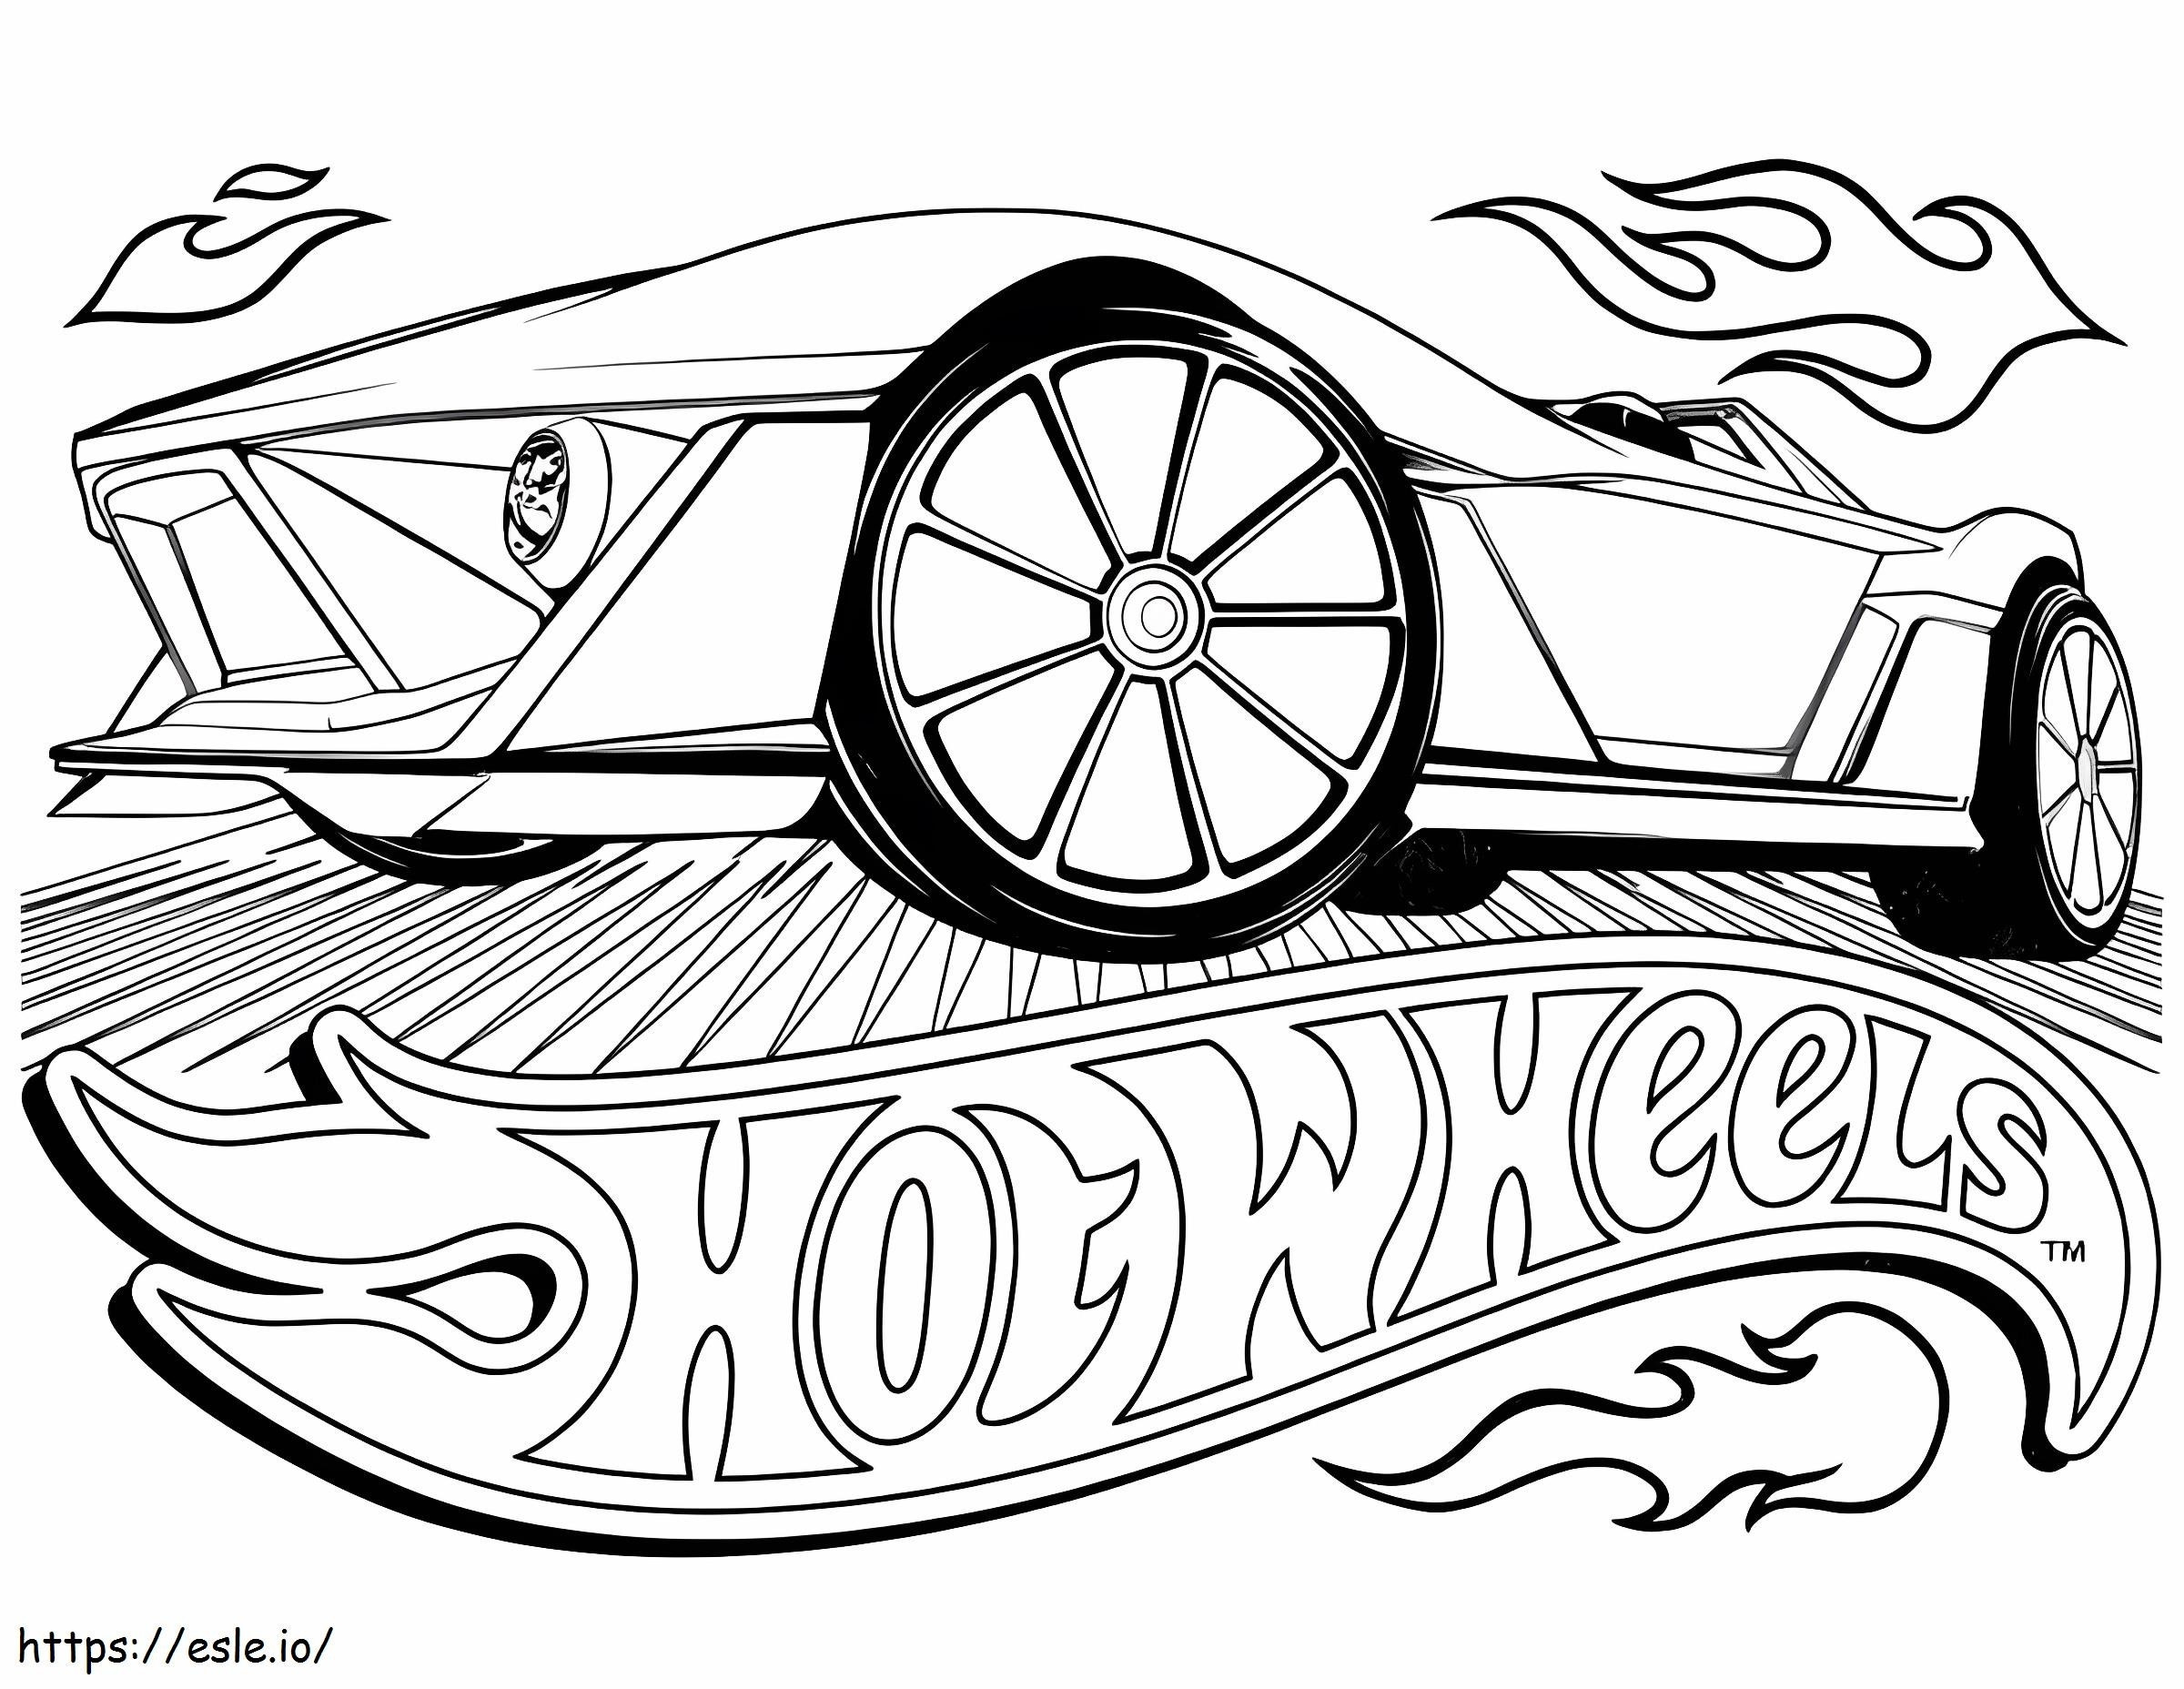 Hot Wheels 16 coloring page